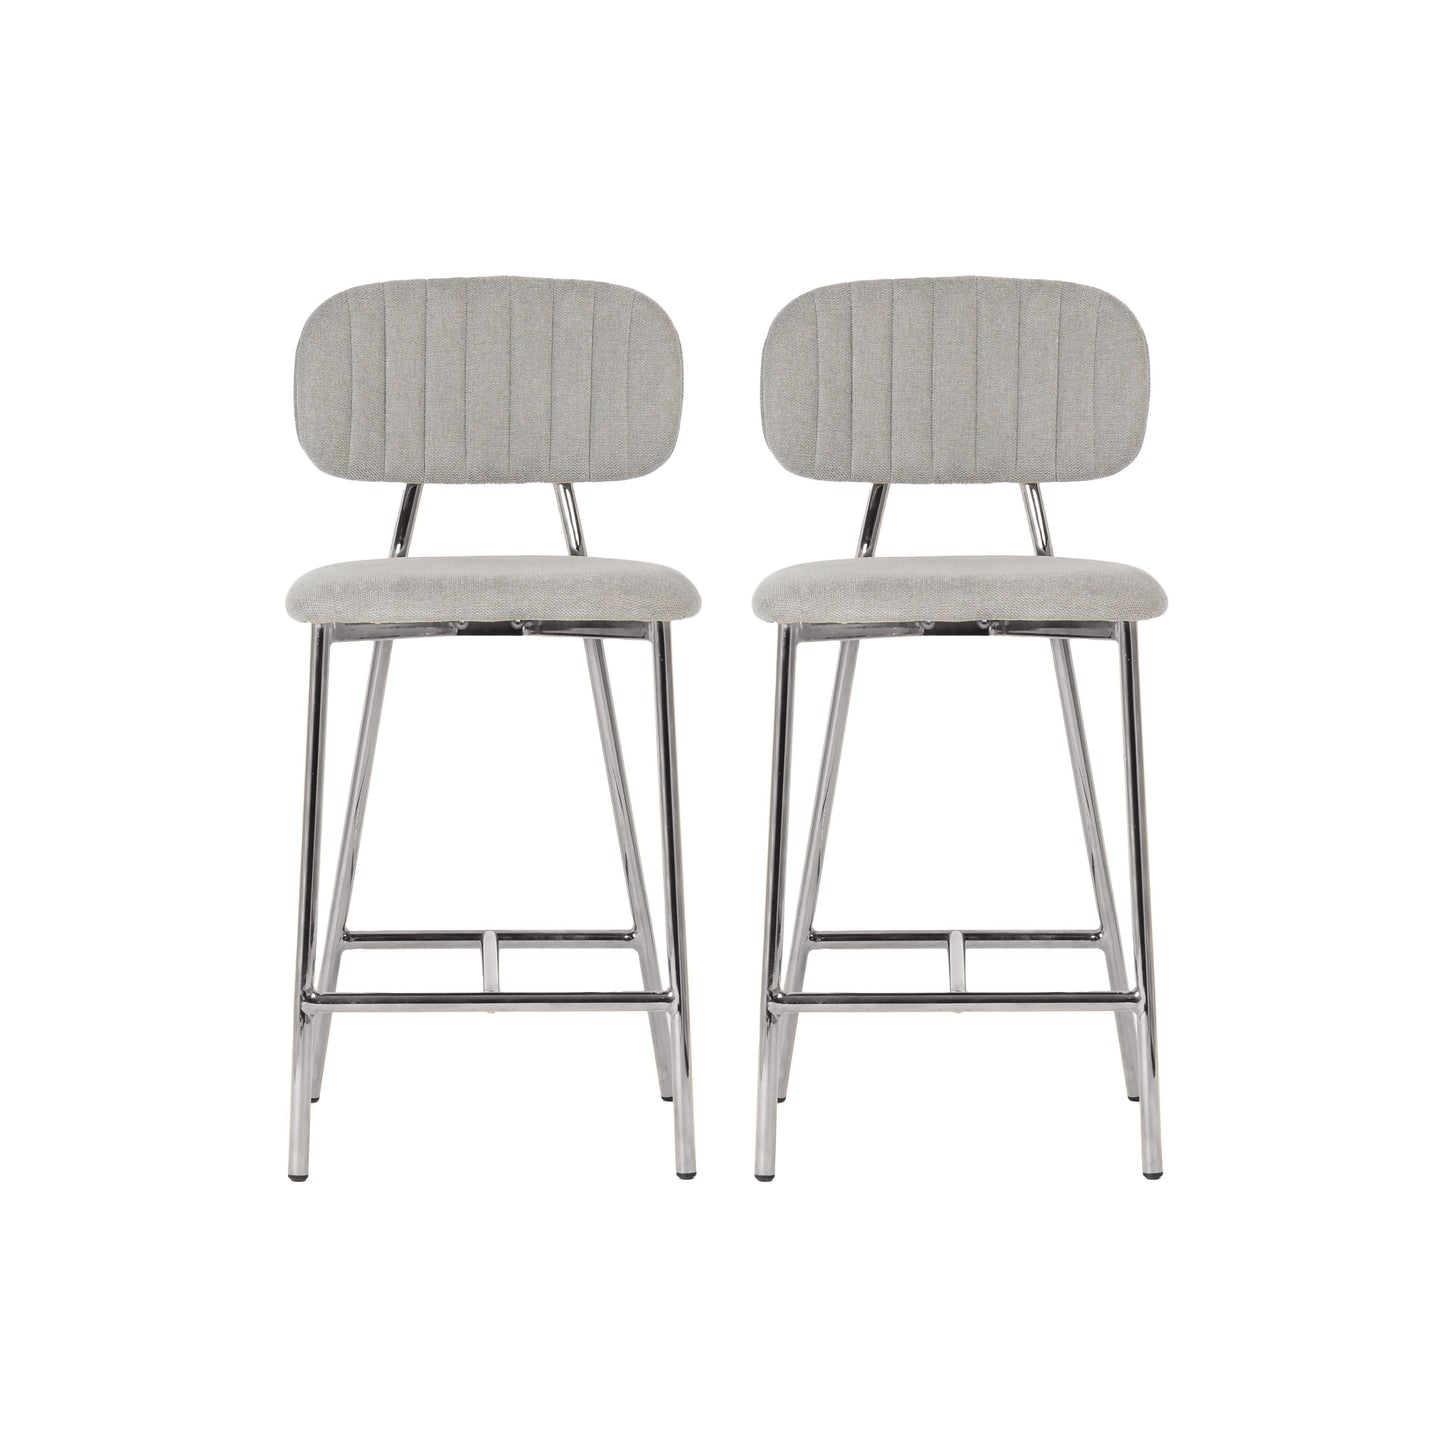 Tov Furniture Ariana Grey Counter Stool Silver Legs Set of 2